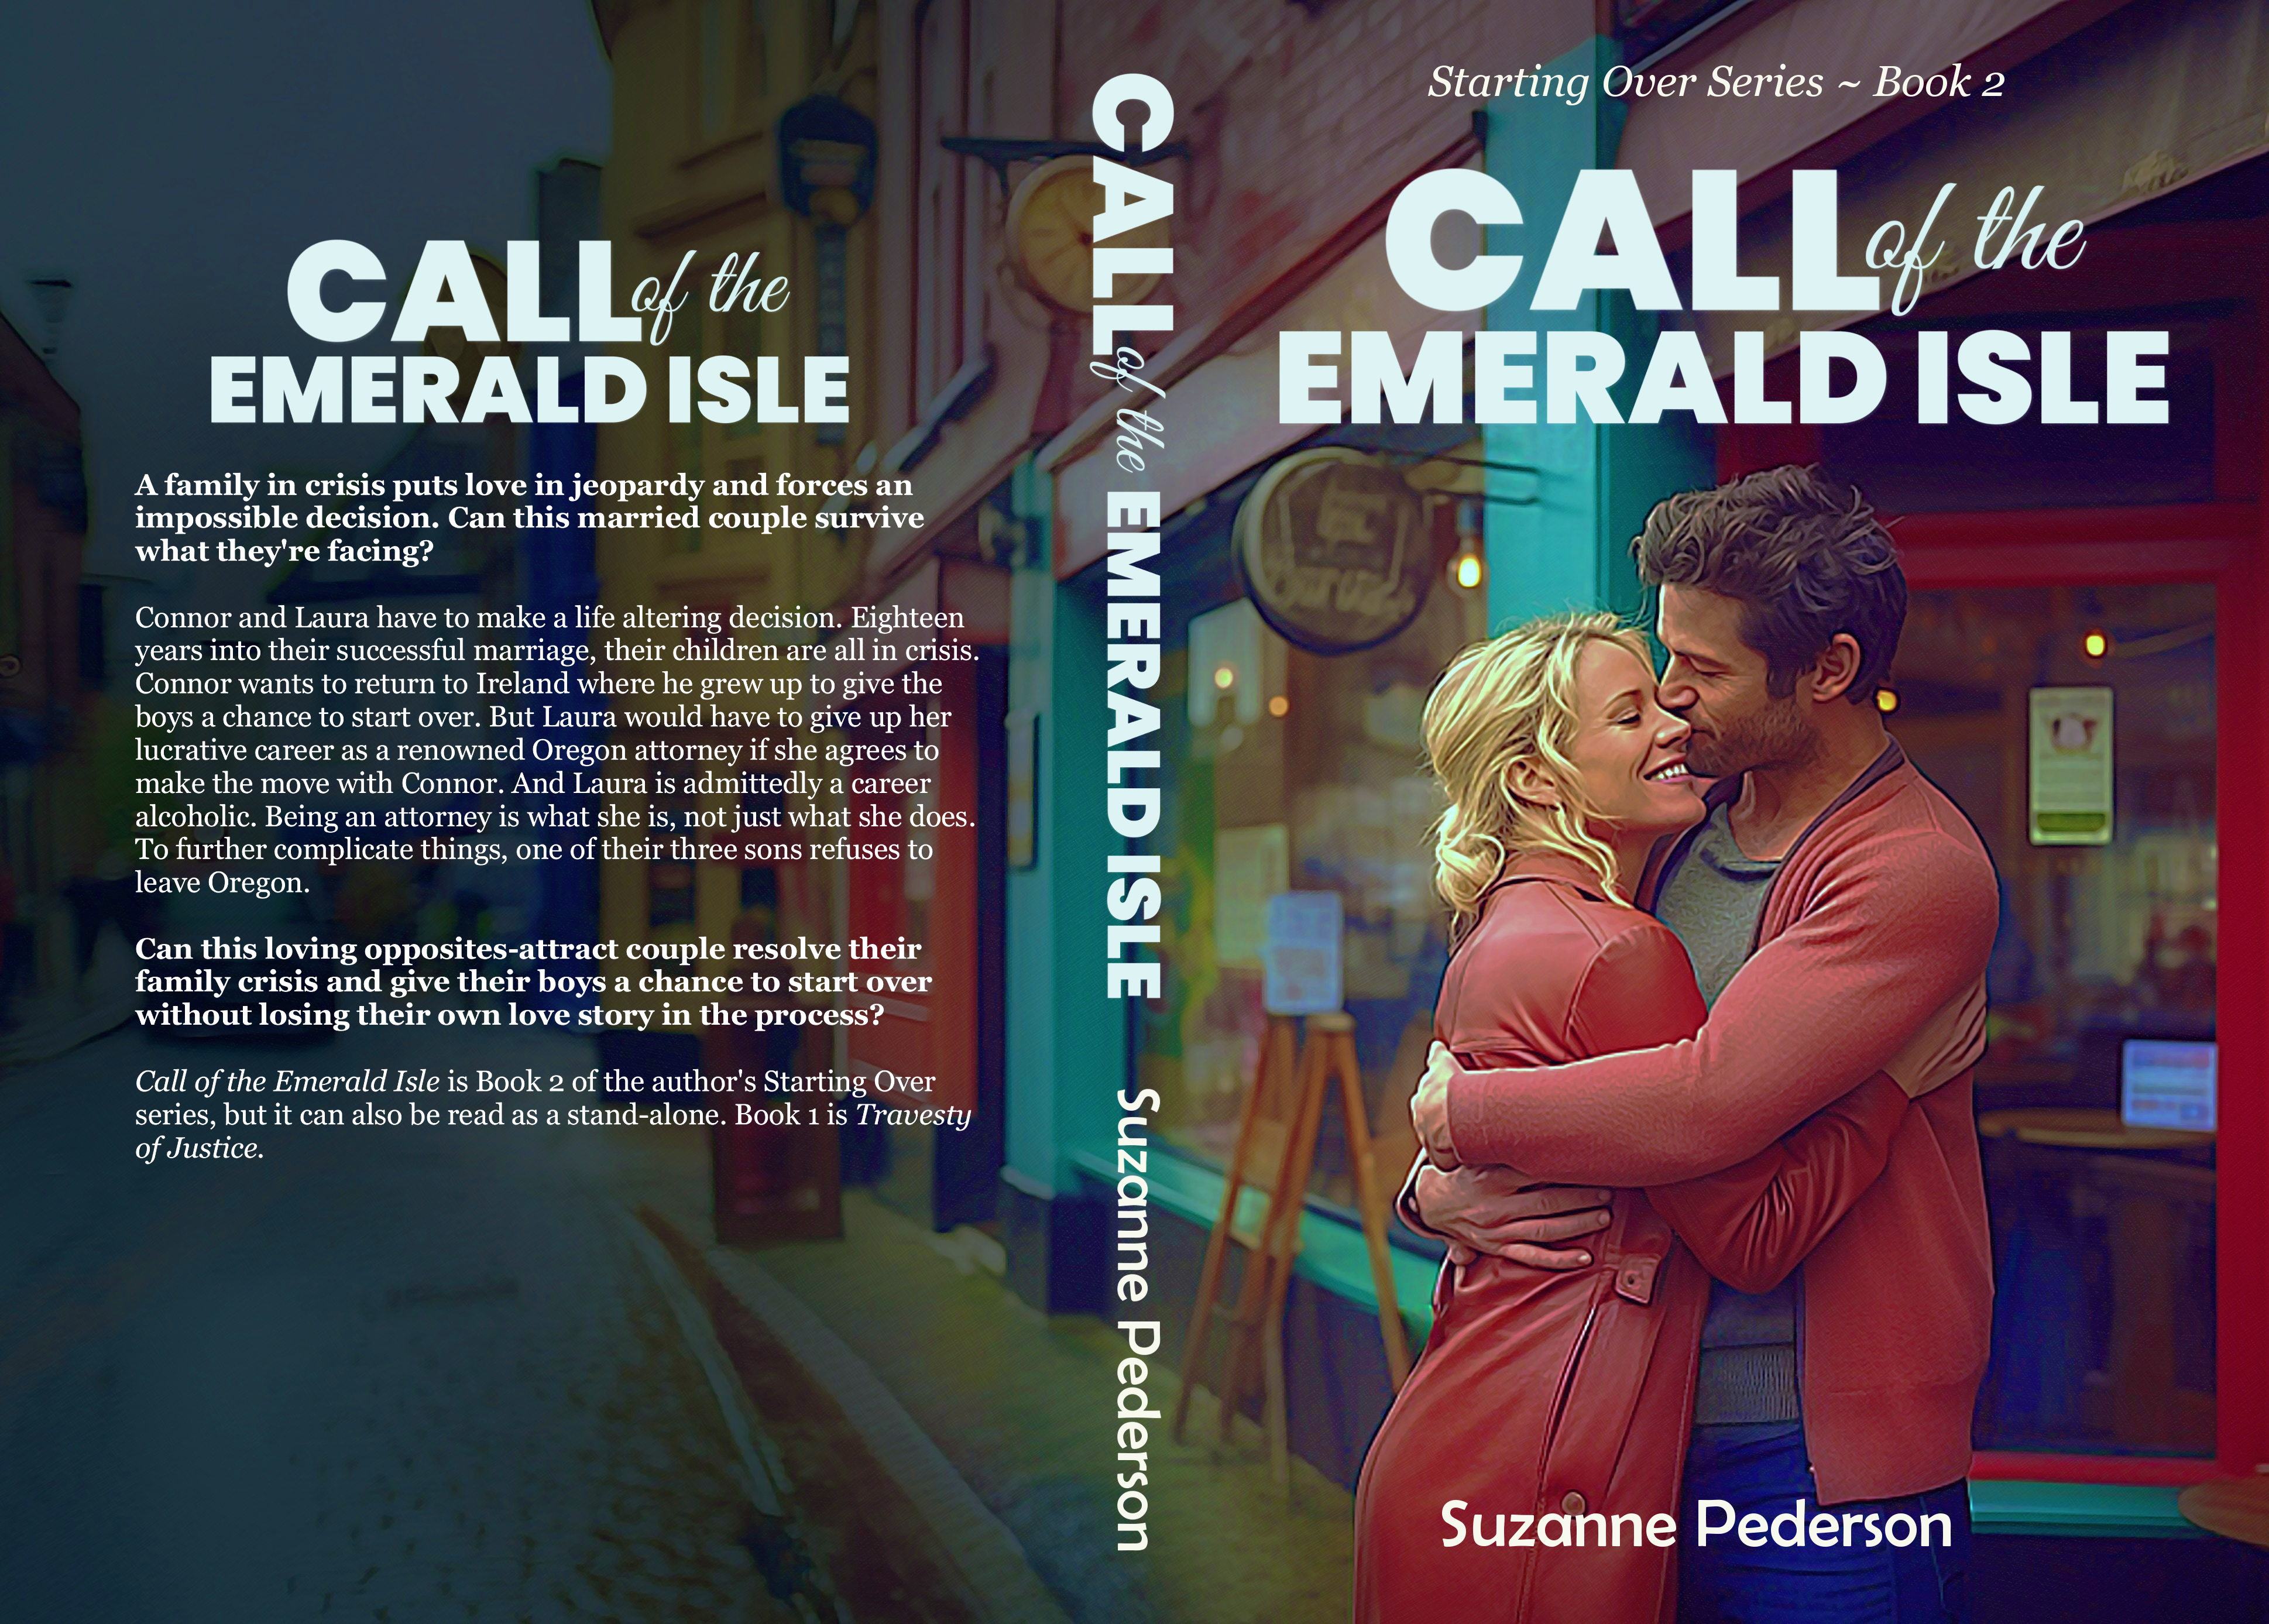 Call of the Emerald Isle - Book 2 in the Starting Over series